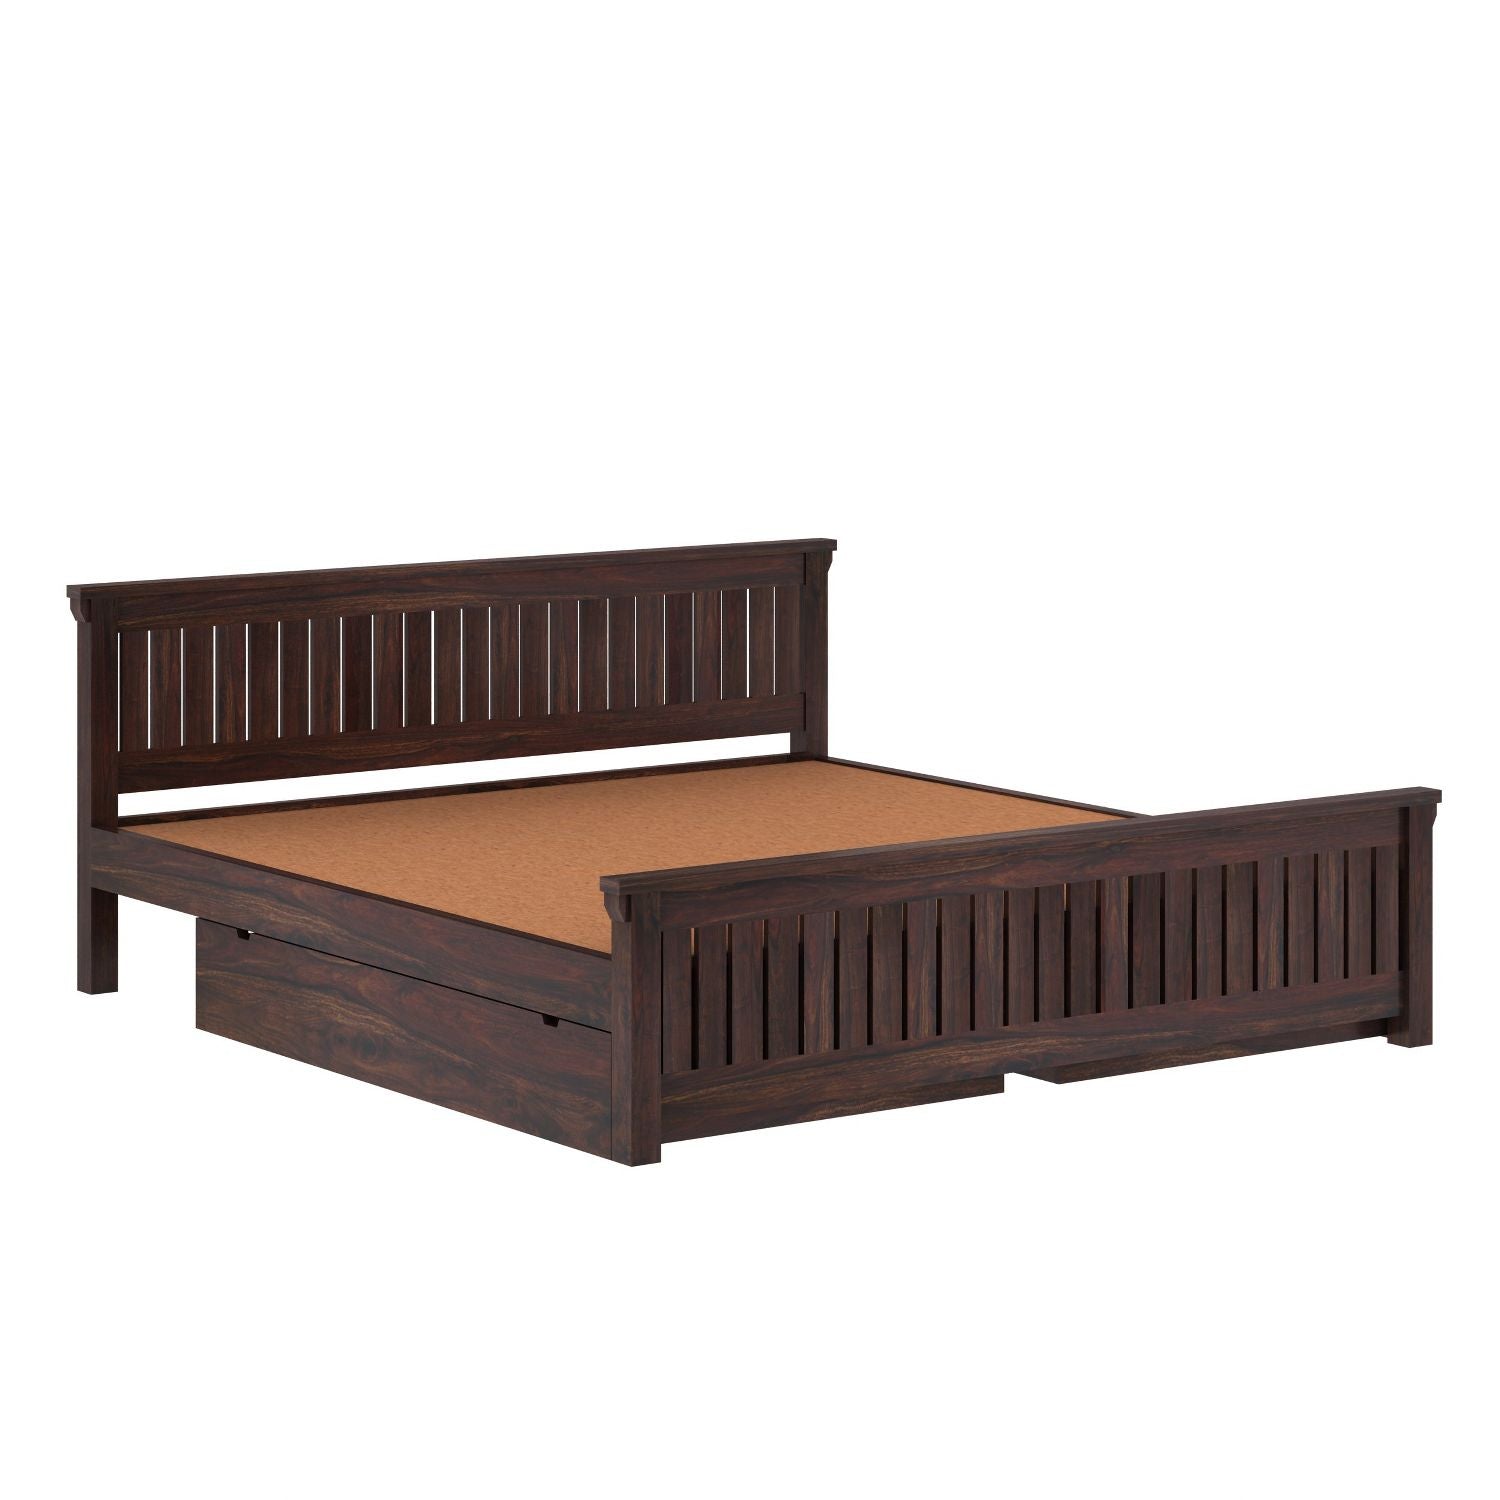 Trinity Solid Sheesham Wood Bed With Two Drawers (Queen Size, Walnut Finish)